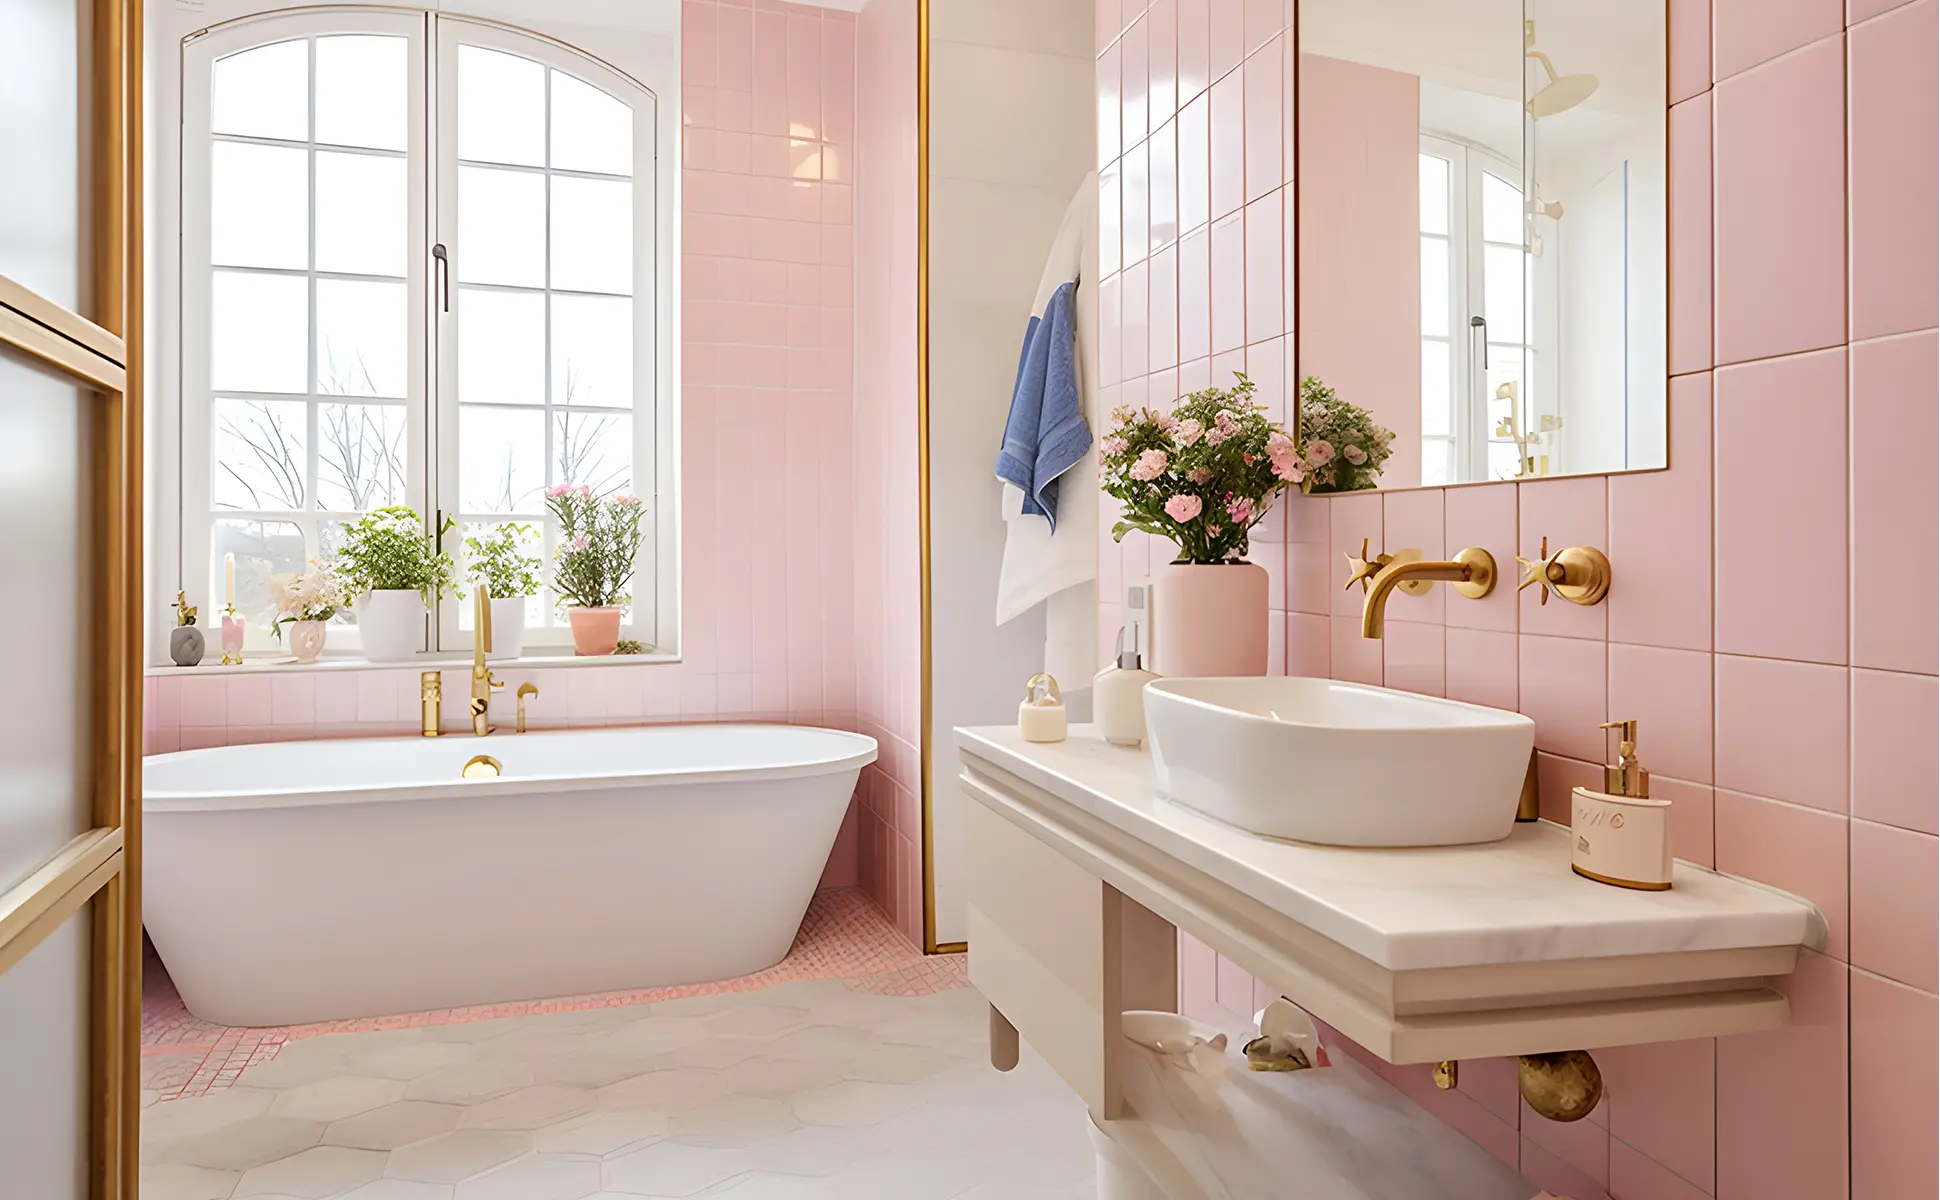 Learn how to decorate a bathroom that has pink tile and gold fixtures by utilizing complementary colors and elegant accessories.